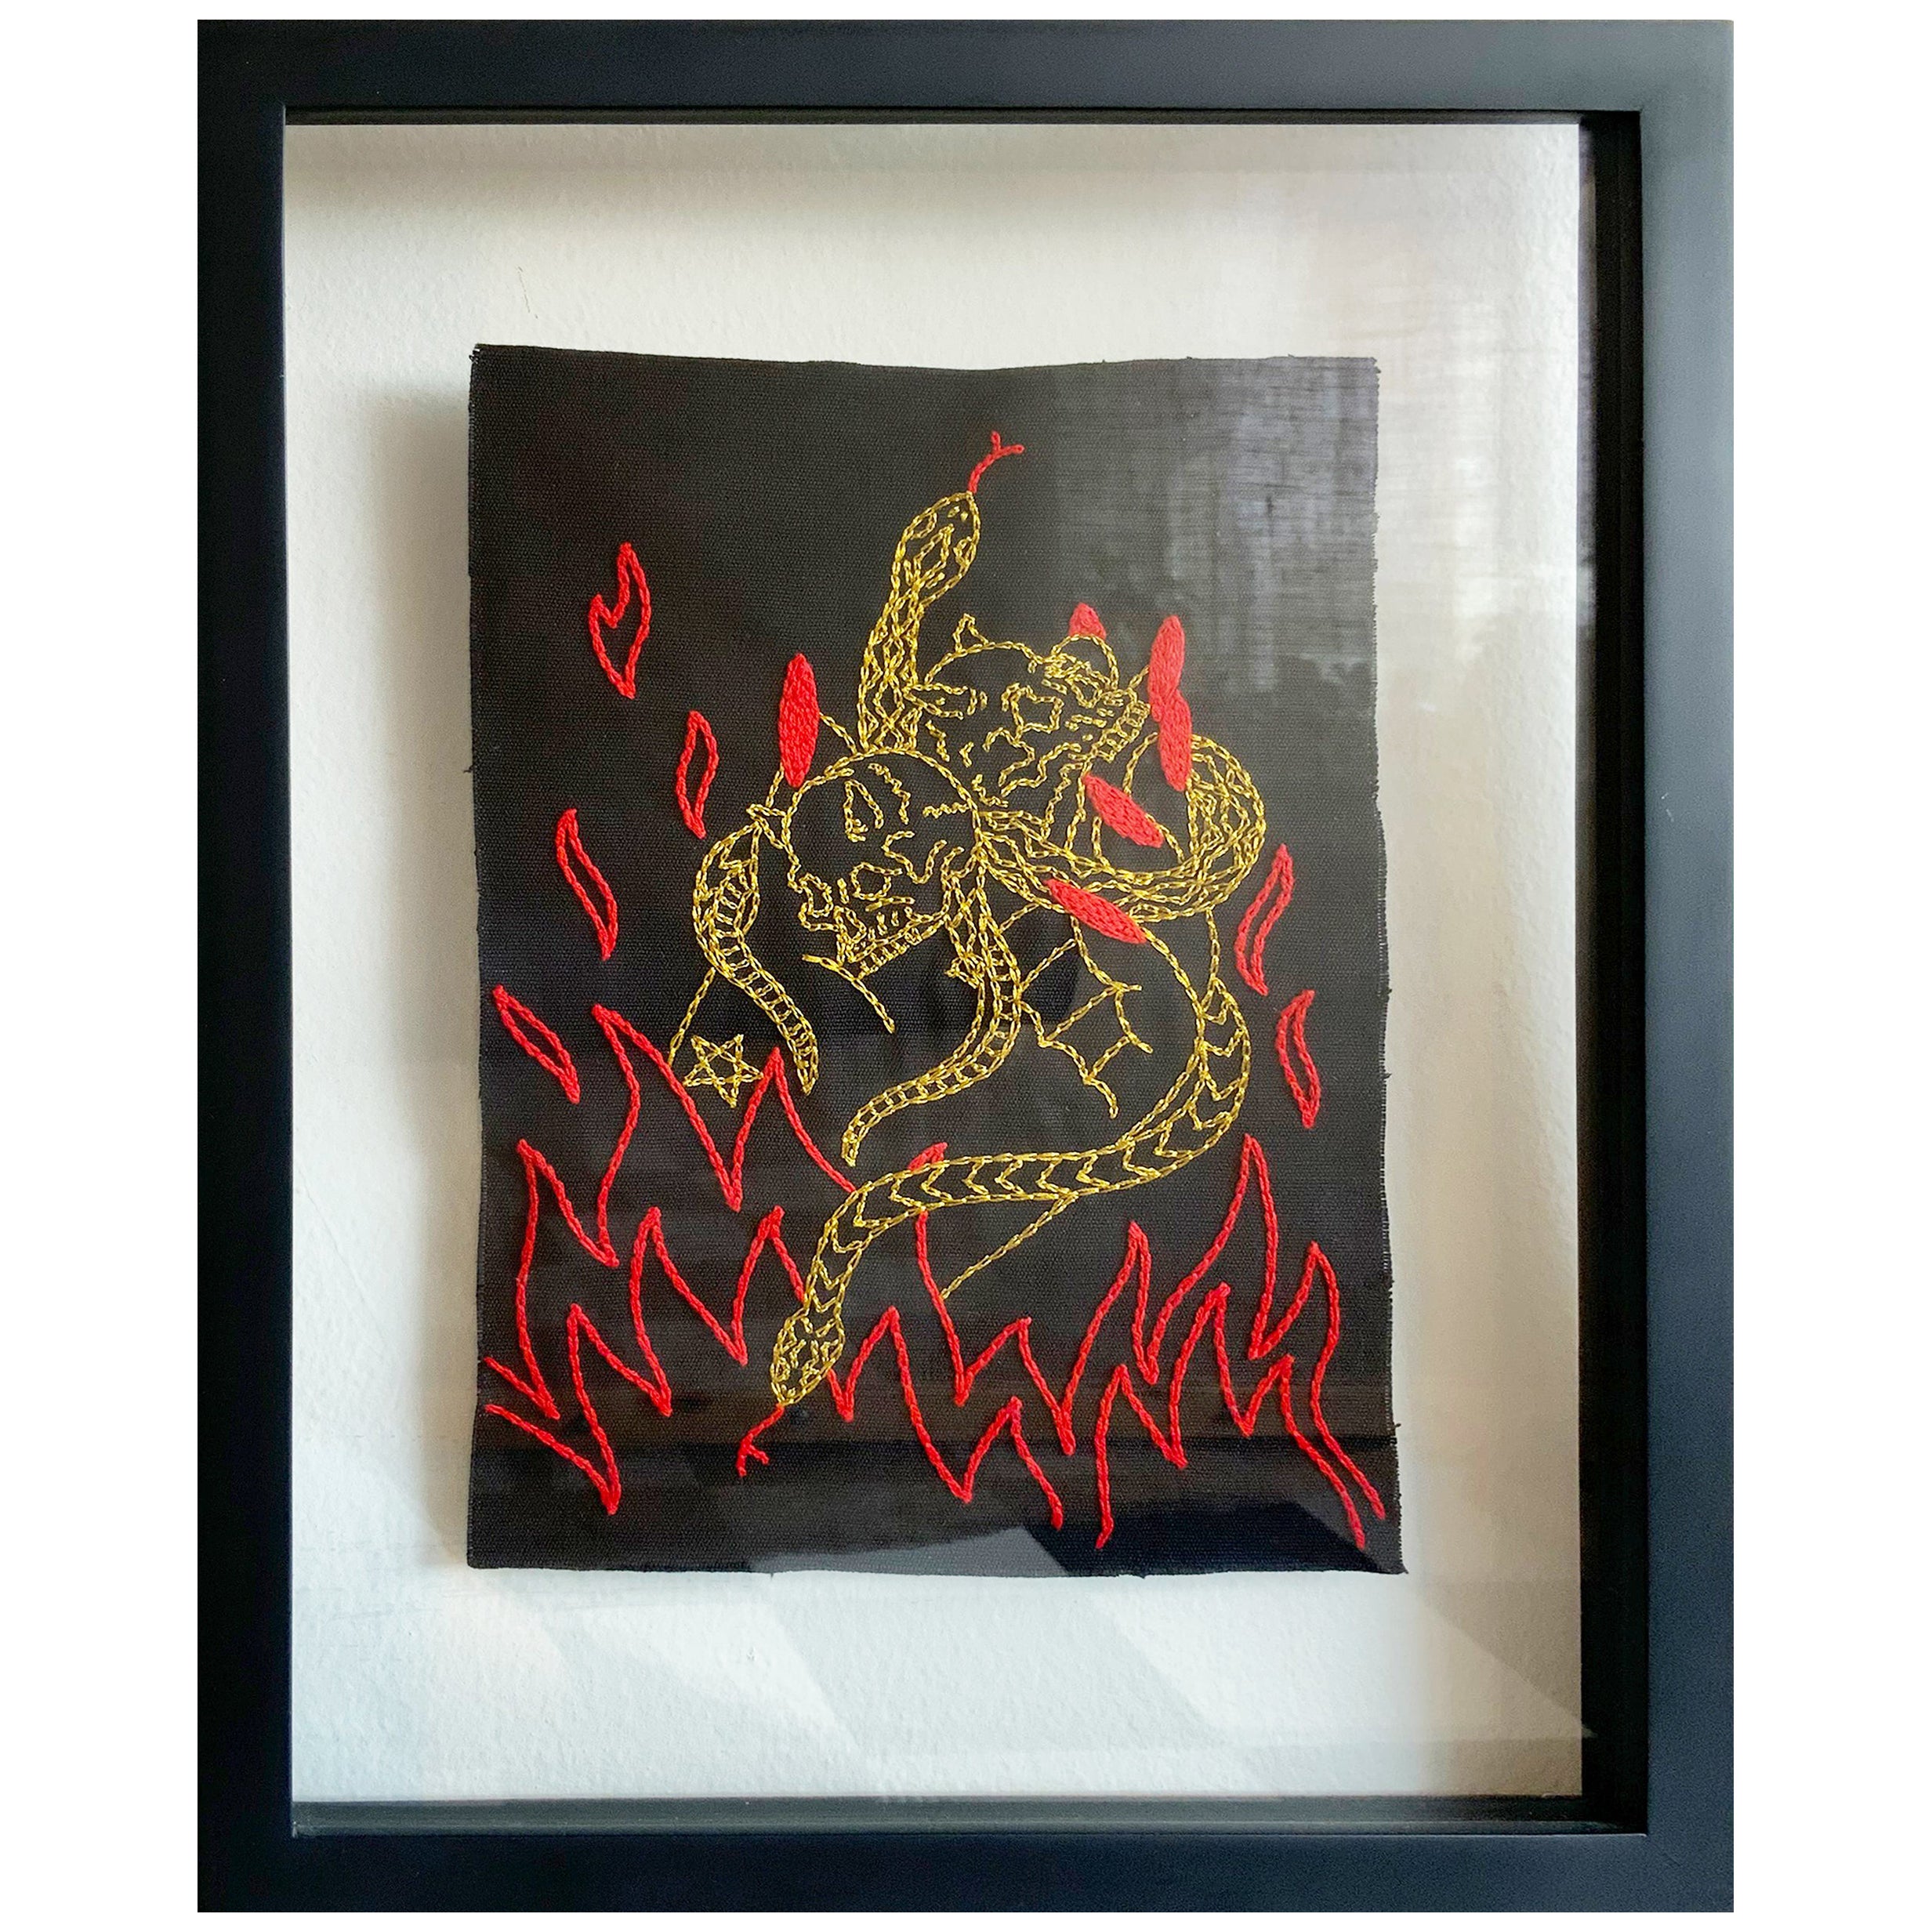 El Diablo. From The Ventura Series.  Embroidery thread on canvas For Sale